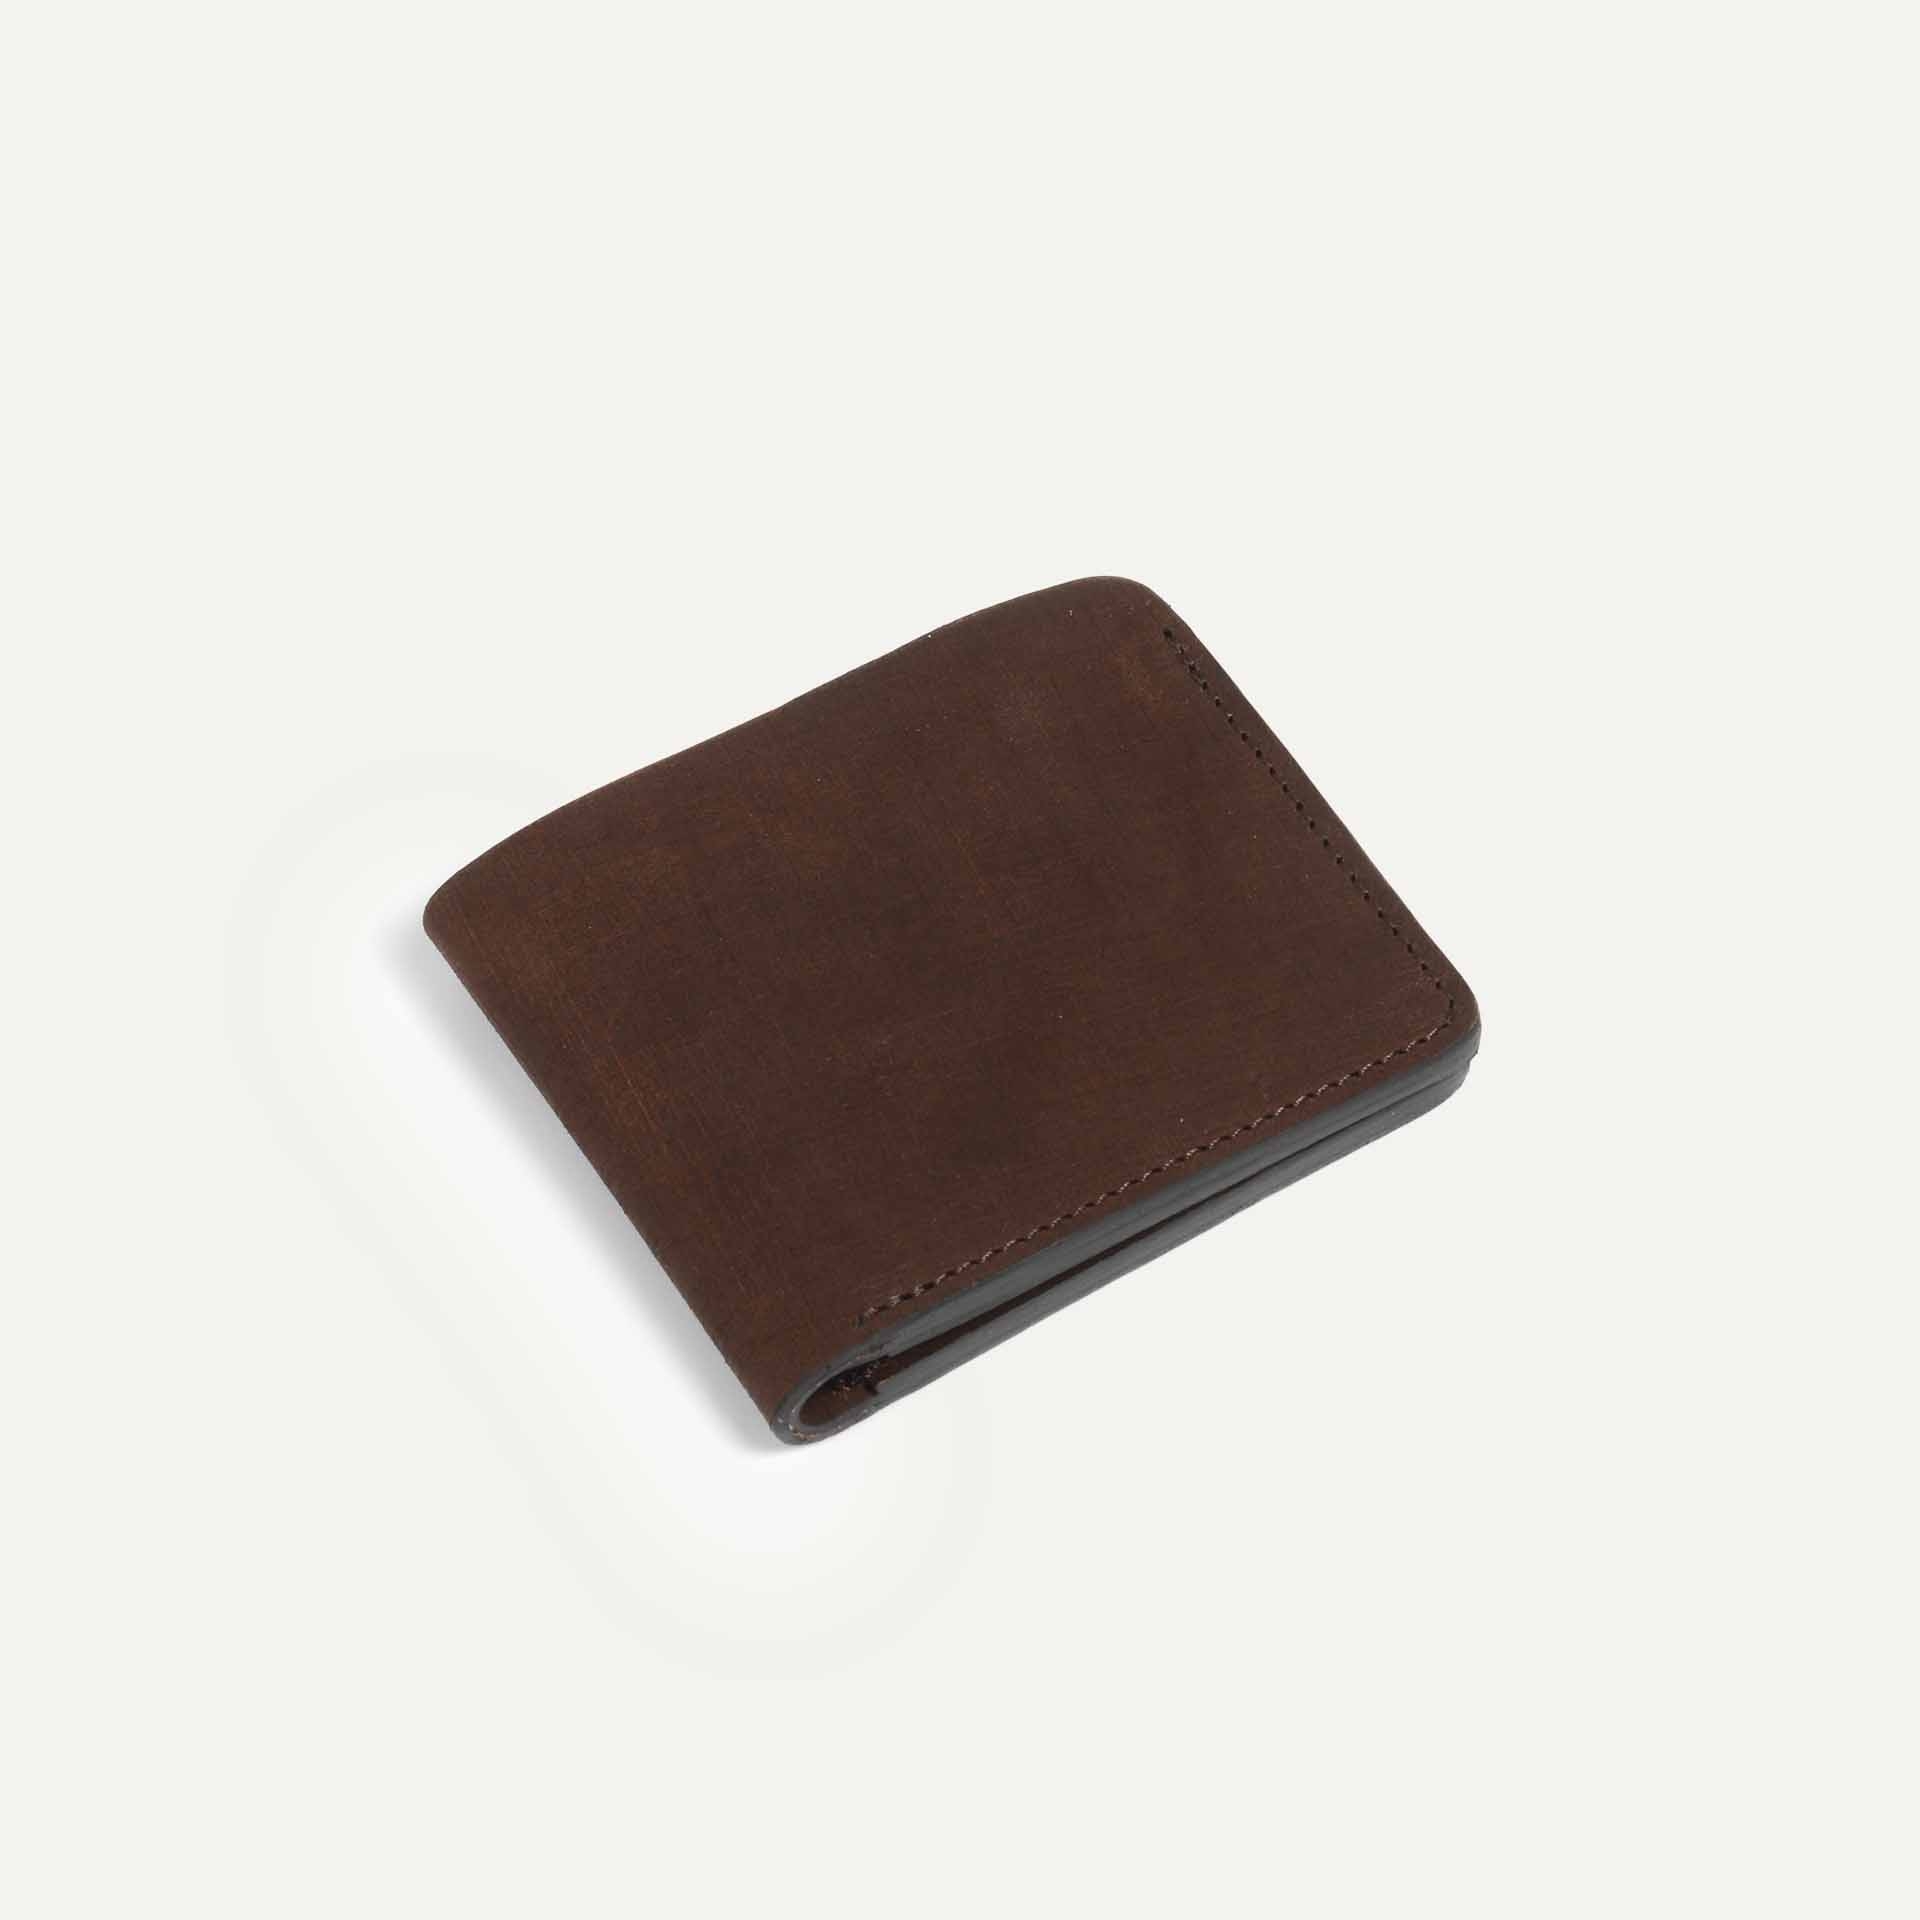 PEZE wallet - Coffee / Waxed Leather (image n°2)